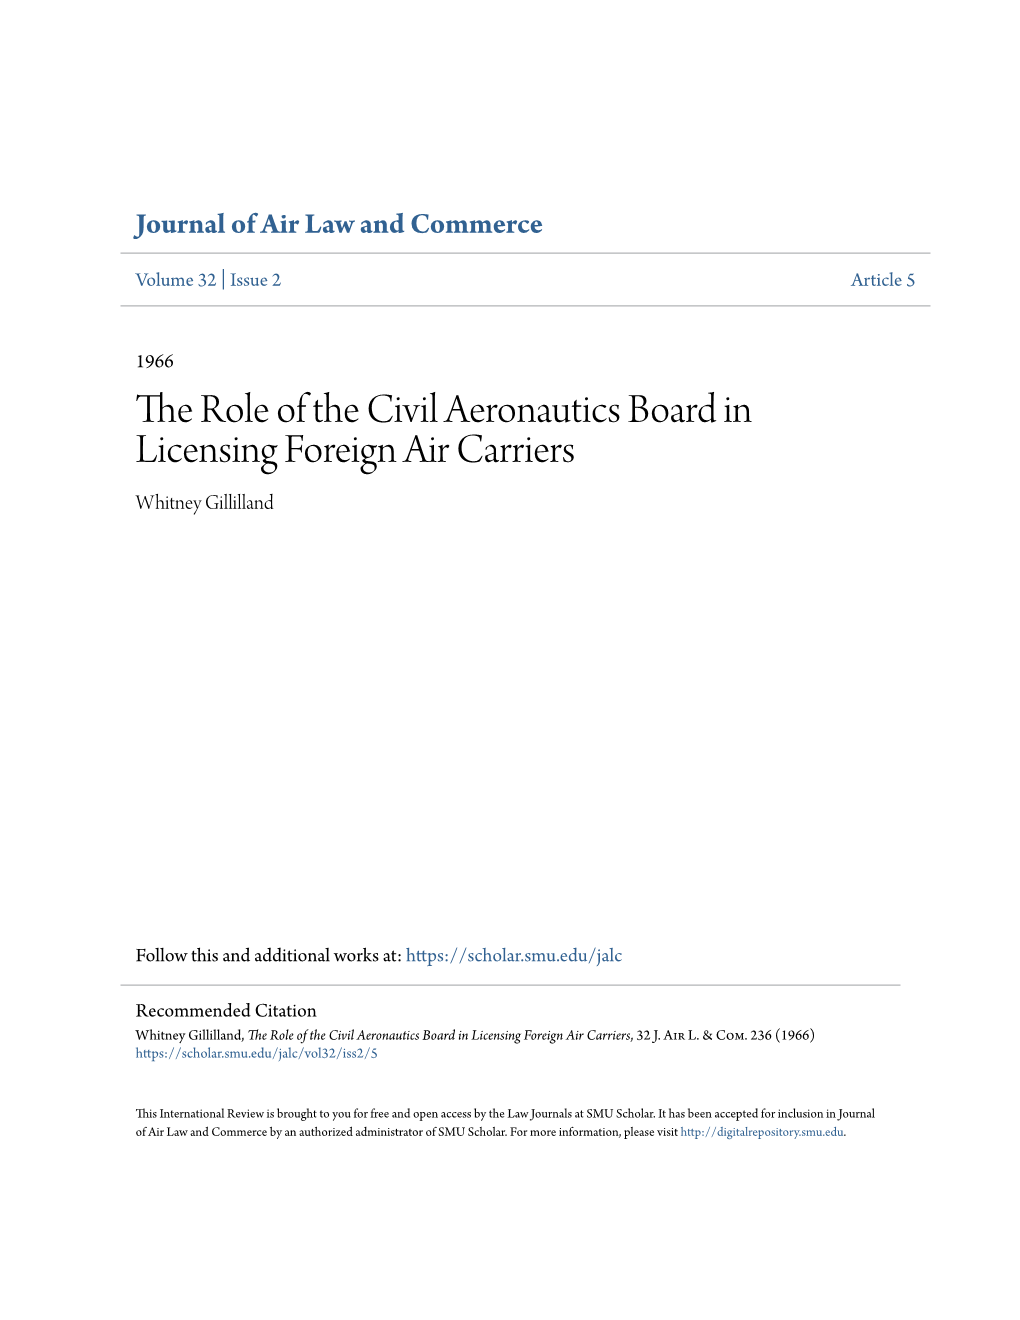 The Role of the Civil Aeronautics Board in Licensing Foreign Air Carriers Whitney Gillilland